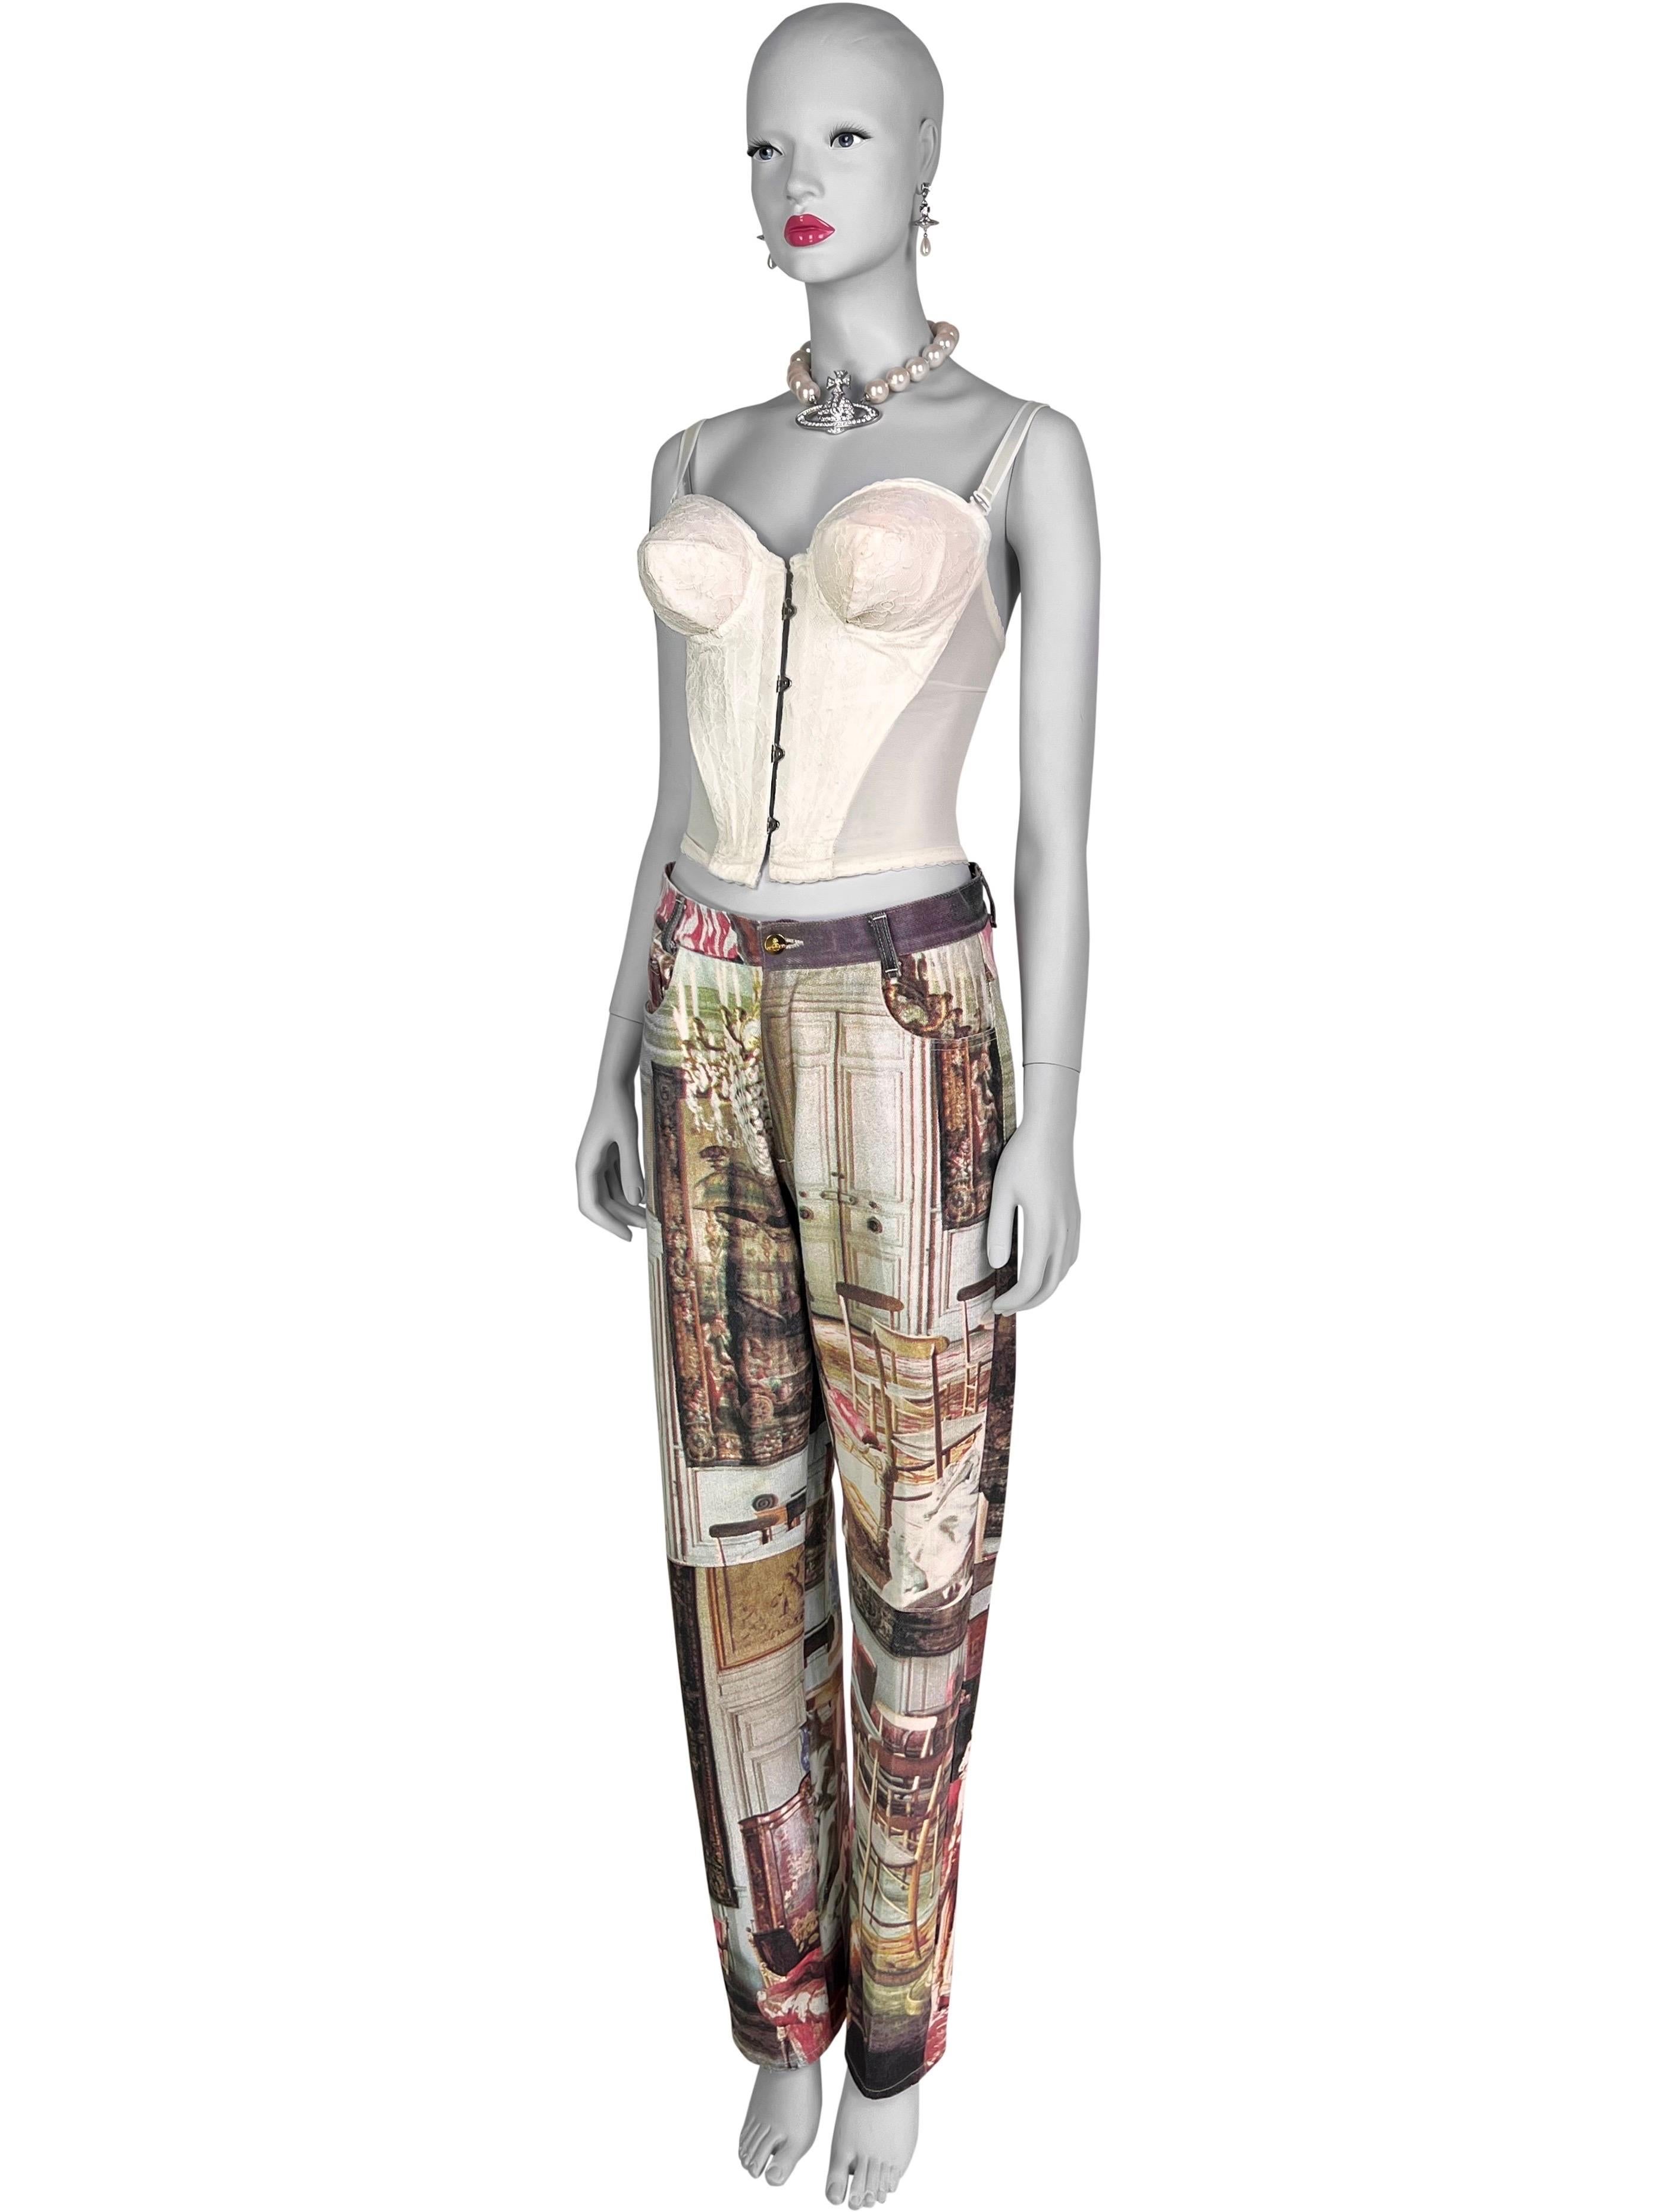 Vivienne Westwood Spring 1992 “Salon” Print Straight Jeans In Good Condition For Sale In Prague, CZ